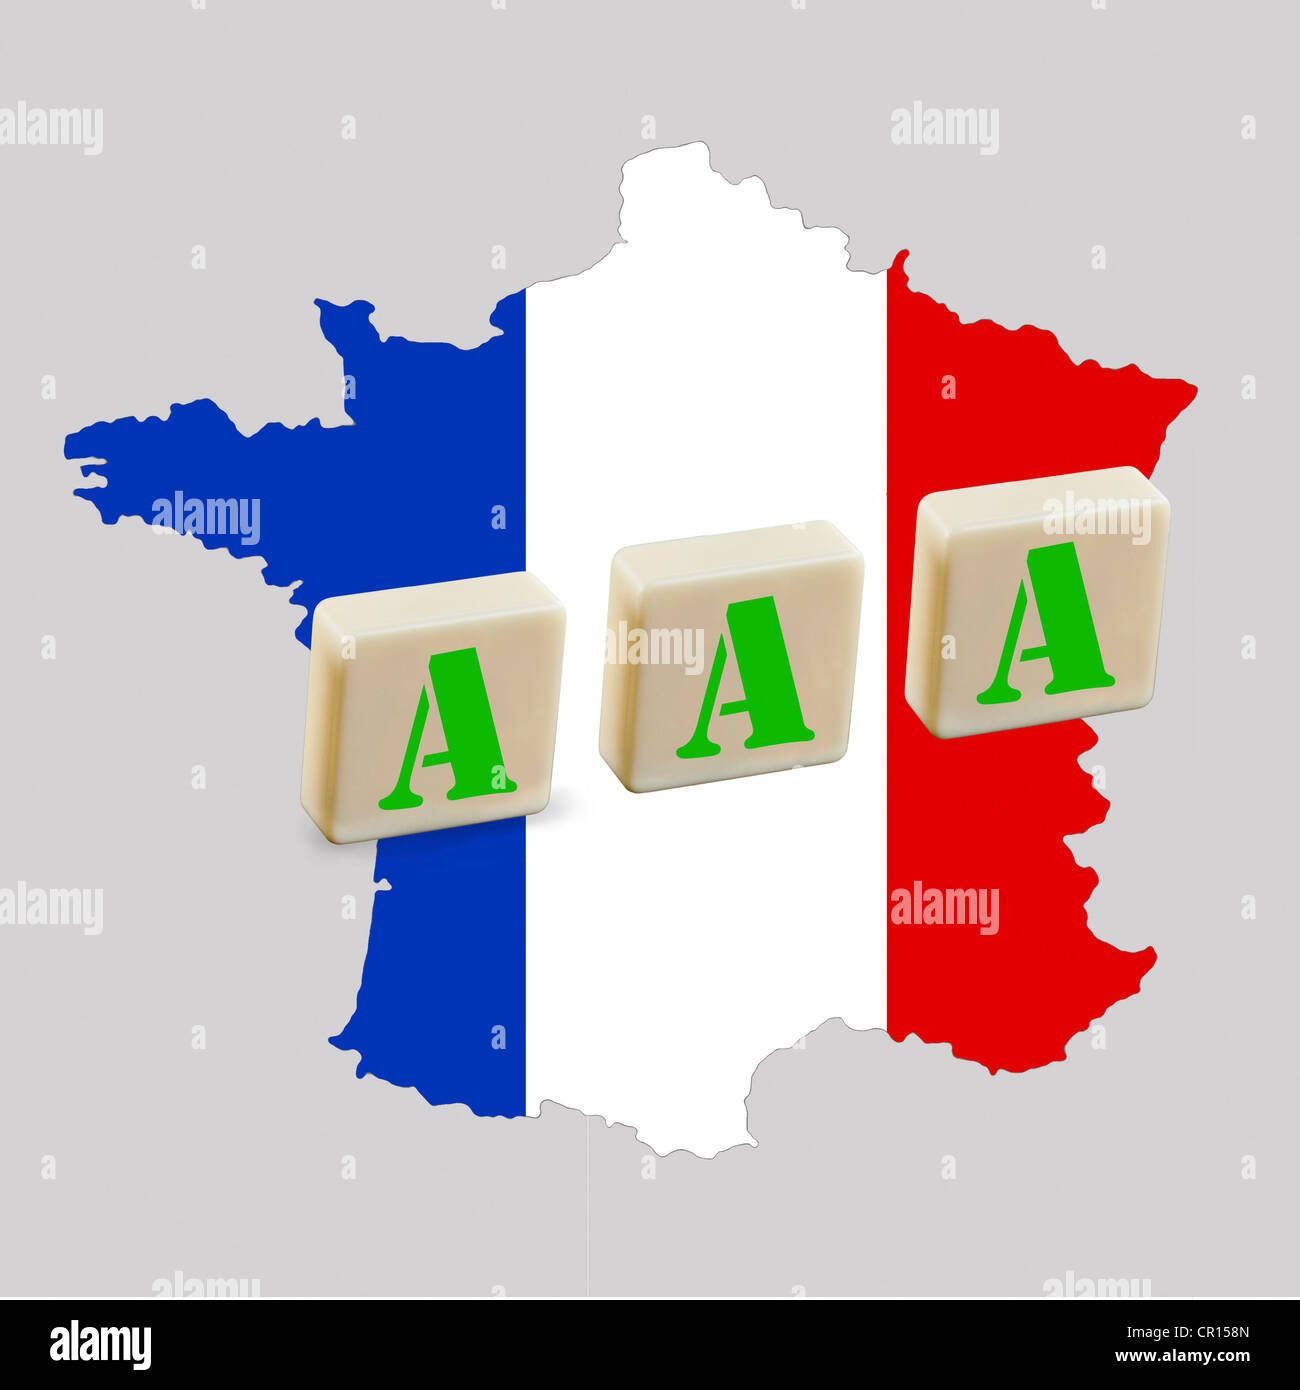 Three A's on a map of France, symbolic image for the triple-A rating by the rating agencies Stock Photo